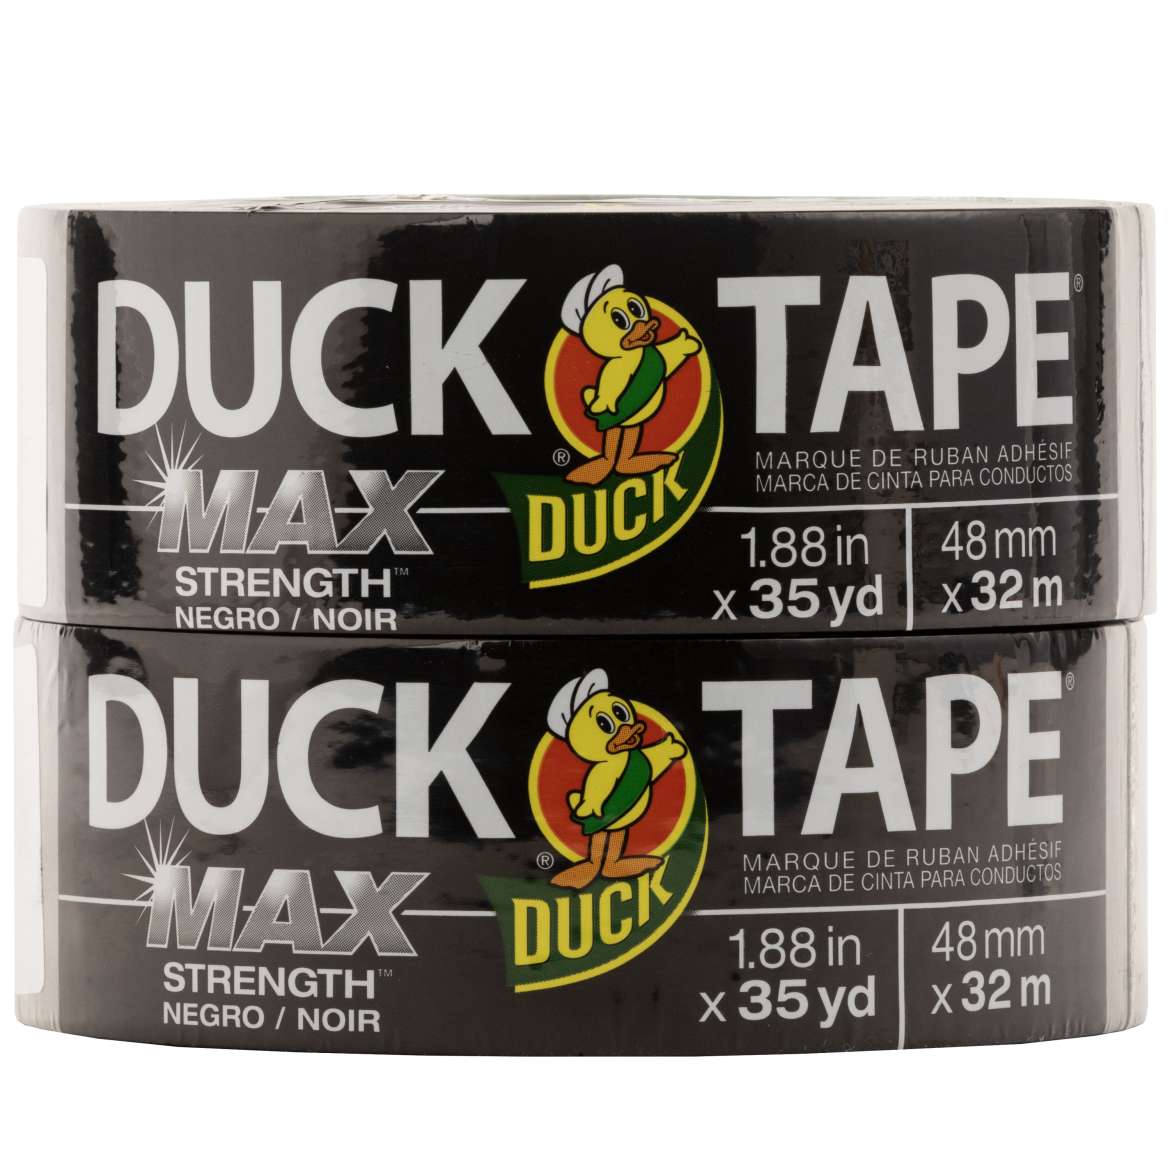 Duck Max Strength® Duct Tape Image